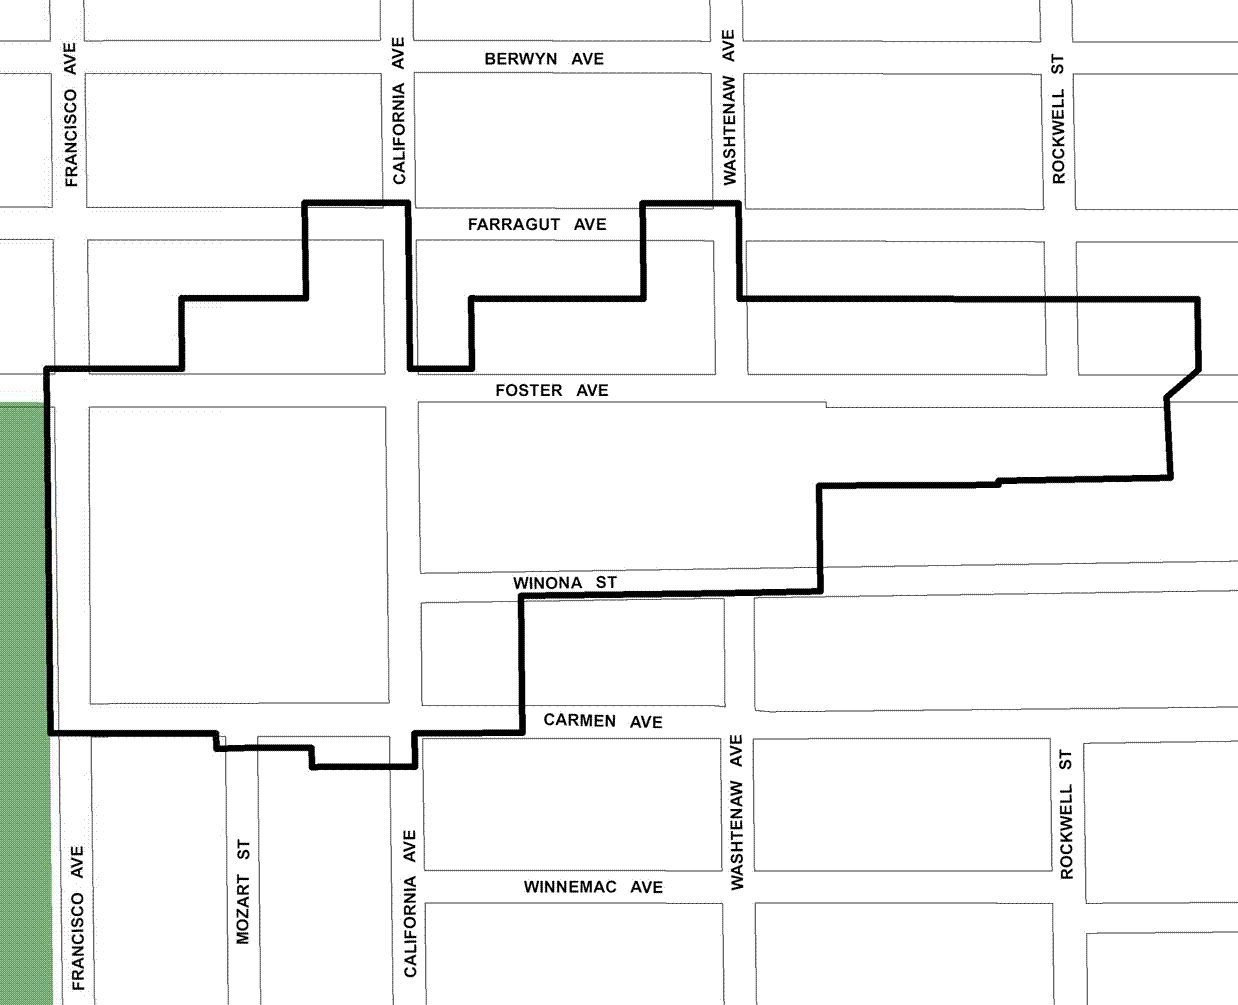 Foster/California TIF district, roughly bounded on the north by Farragut Avenue, Carmen Avenue on the south, Rockwell Street on the east and Francisco Avenue on the west.